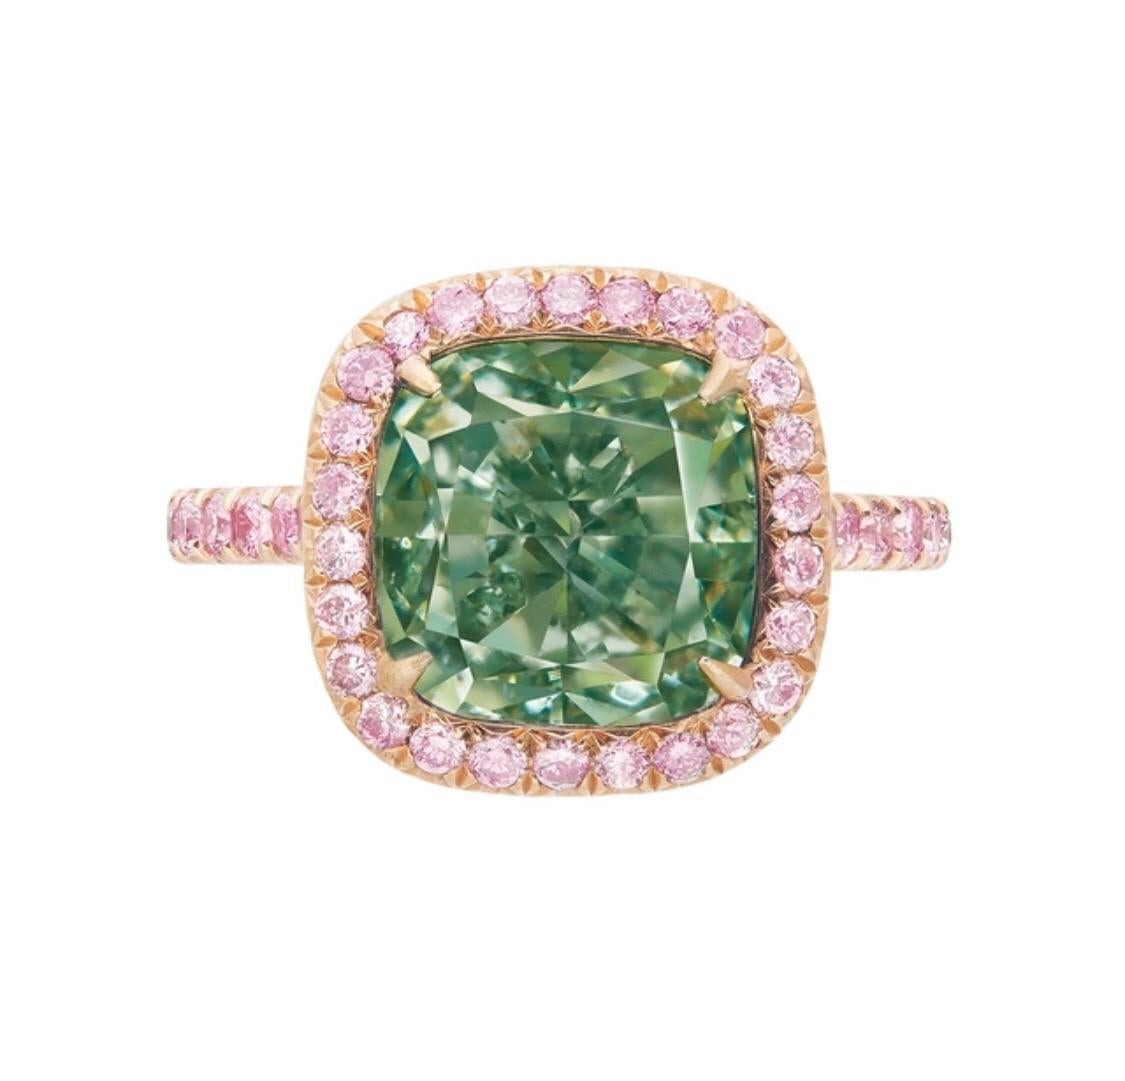 From The Museum Vault at Emilio Jewelry Located on New York's iconic Fifth Avenue,
Showcasing a very special and rare Gia certified natural 6 carat fancy intense green diamond center ring. We are proud to showcase the one and only intense of its